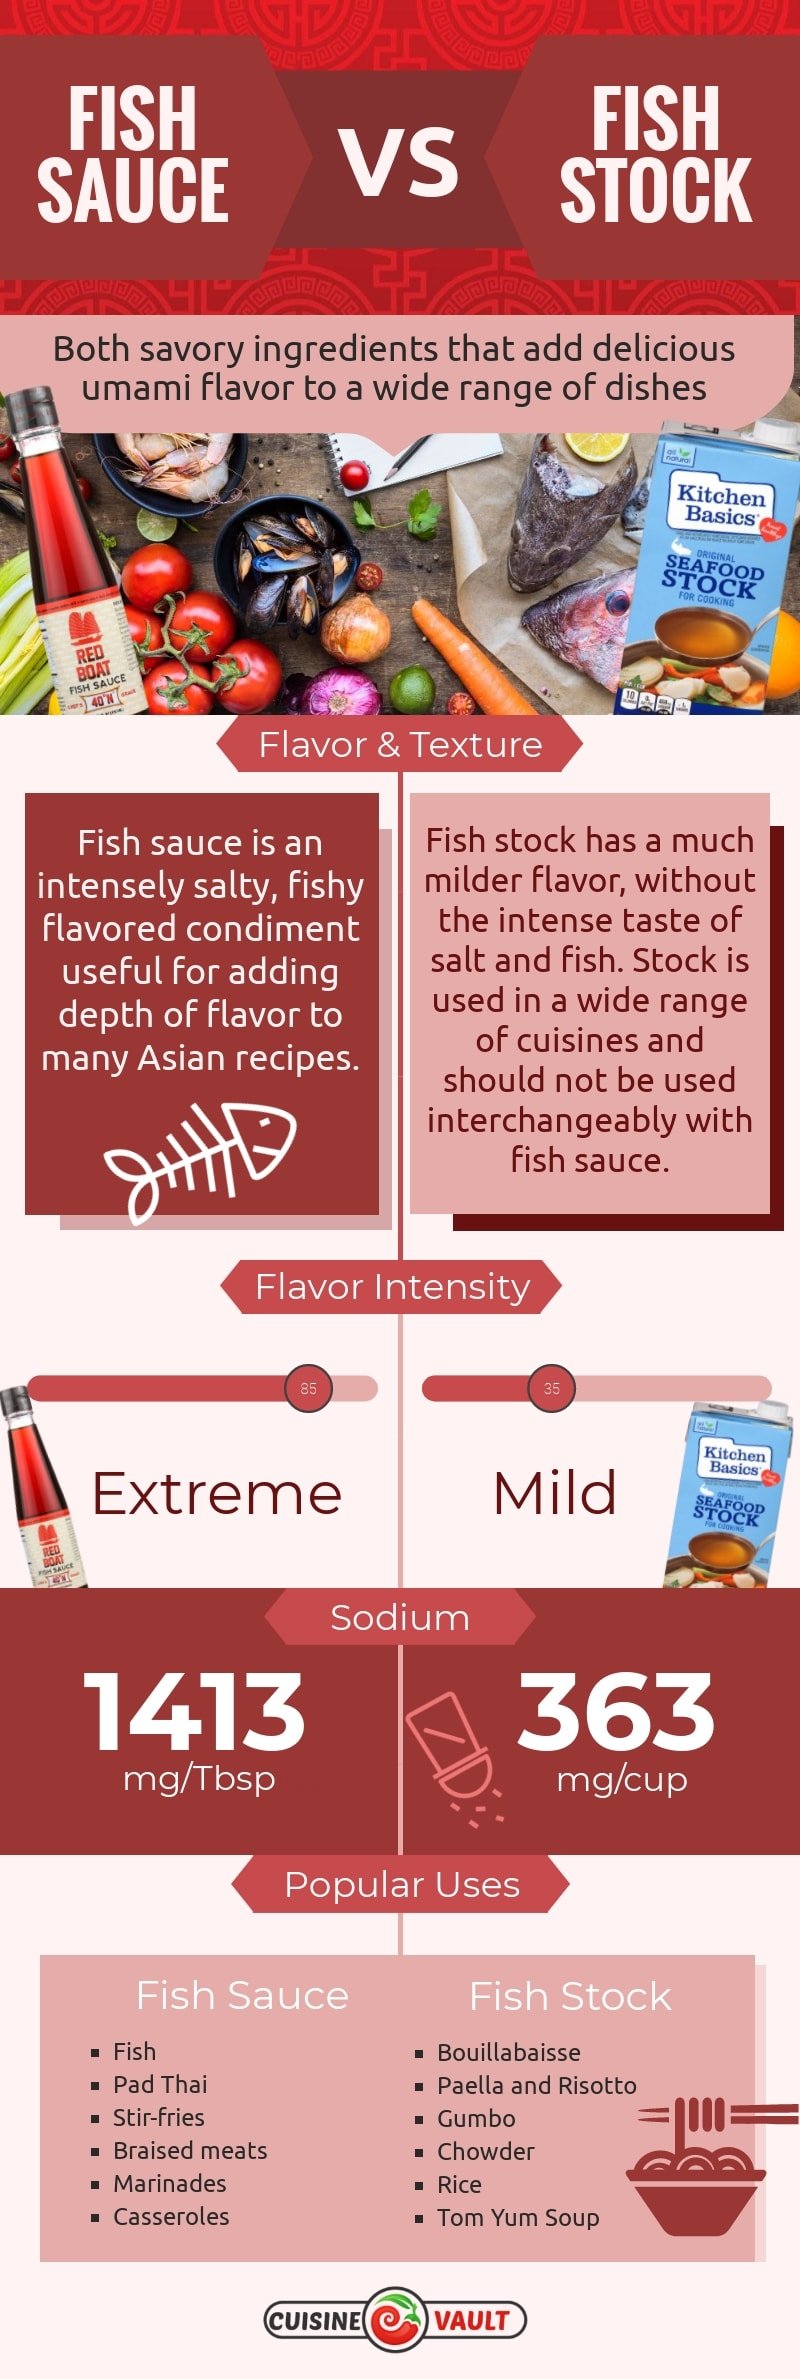 An infographic comparing fish sauce and fish stock